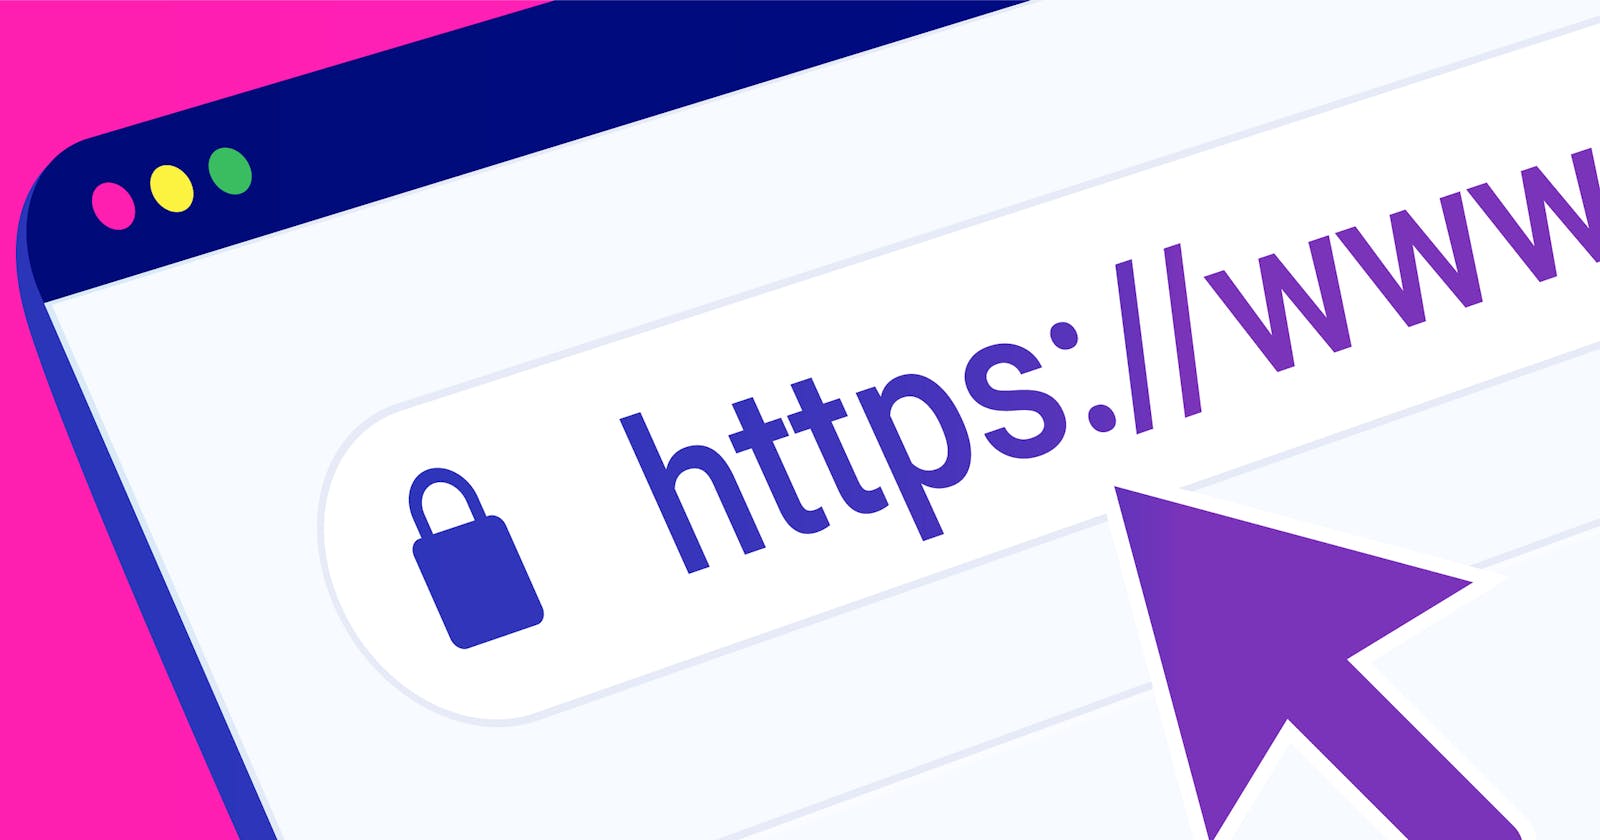 What happens when you type https://www.google.com in your browser and press Enter?